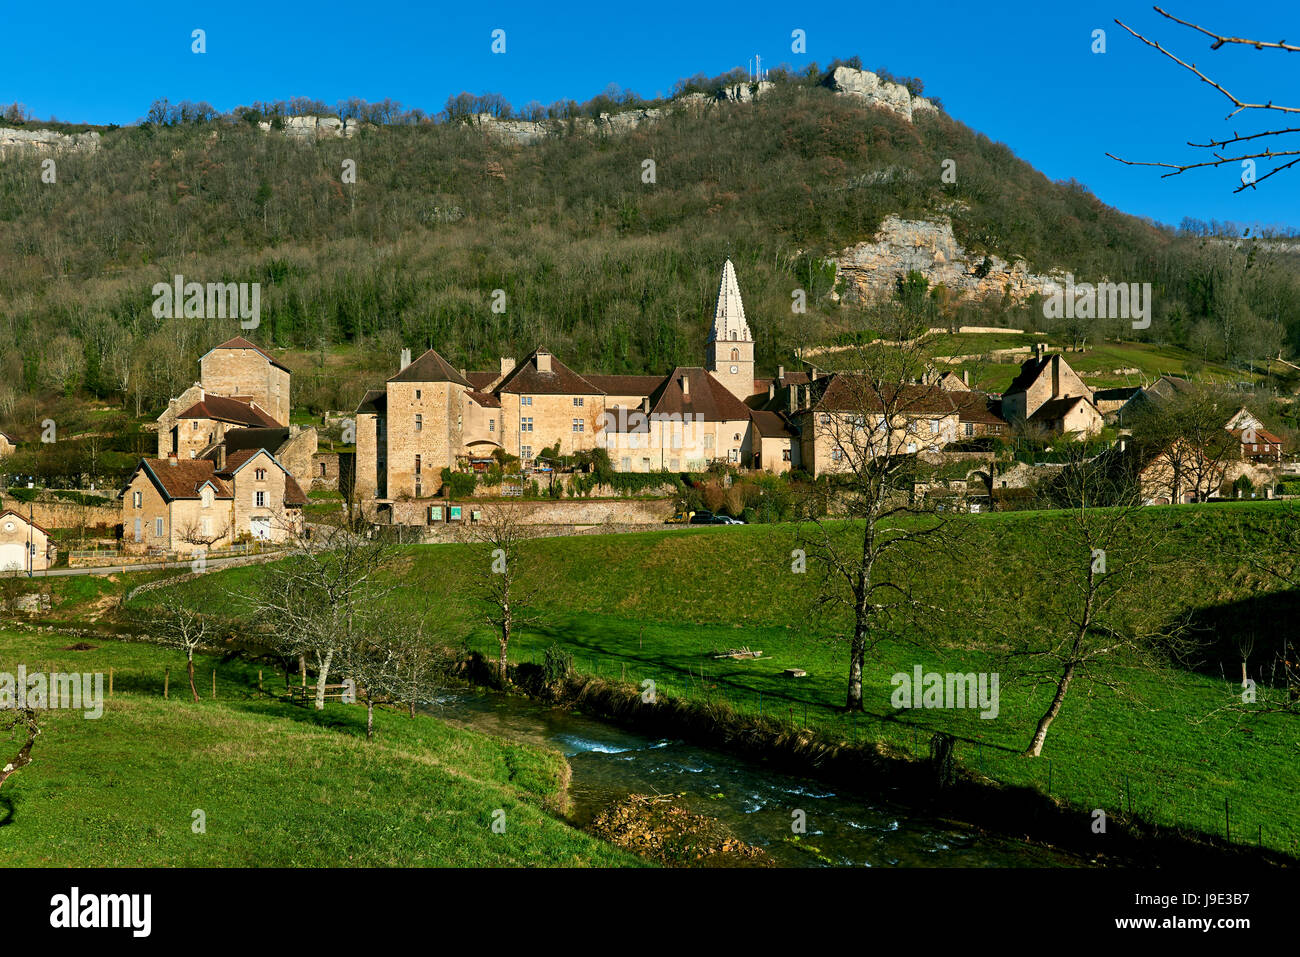 Baume-les-Messieurs village. Jura department of Franche-Comte. Baume-les-Messieurs is classified as one of the most beautiful villages of France Stock Photo